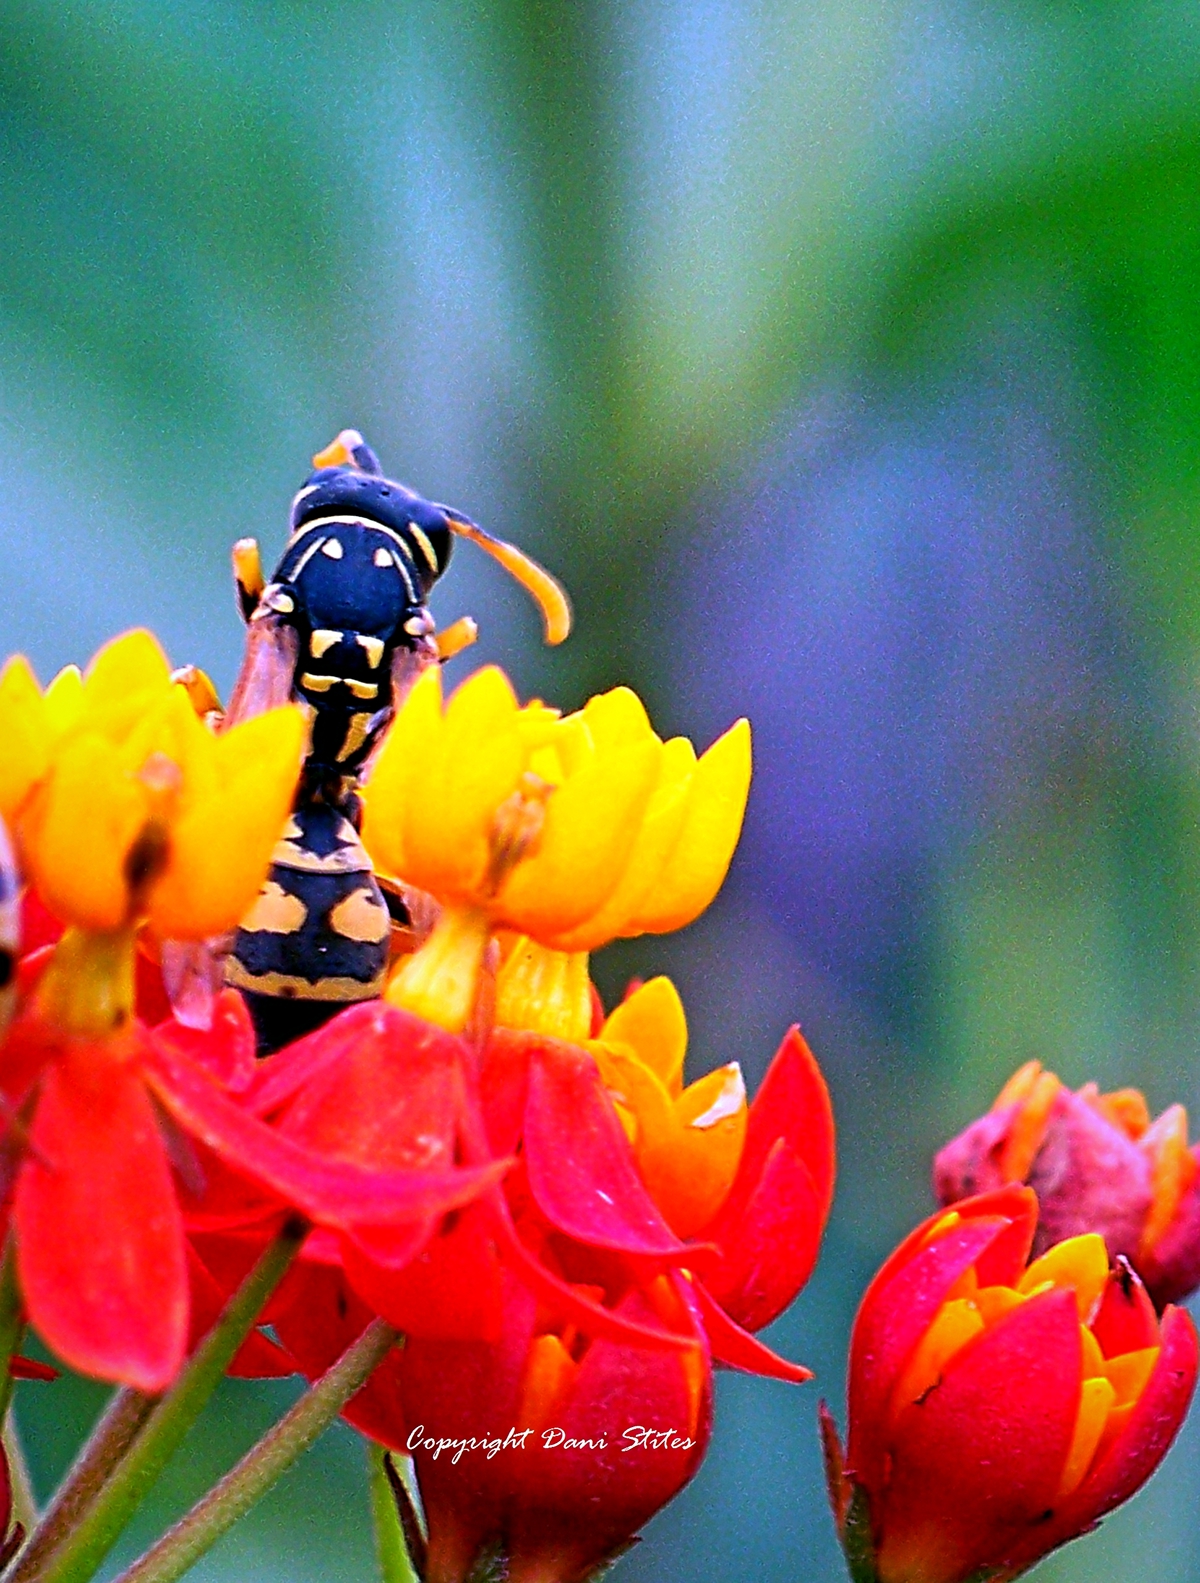 black & yellow wasp insect Nature color